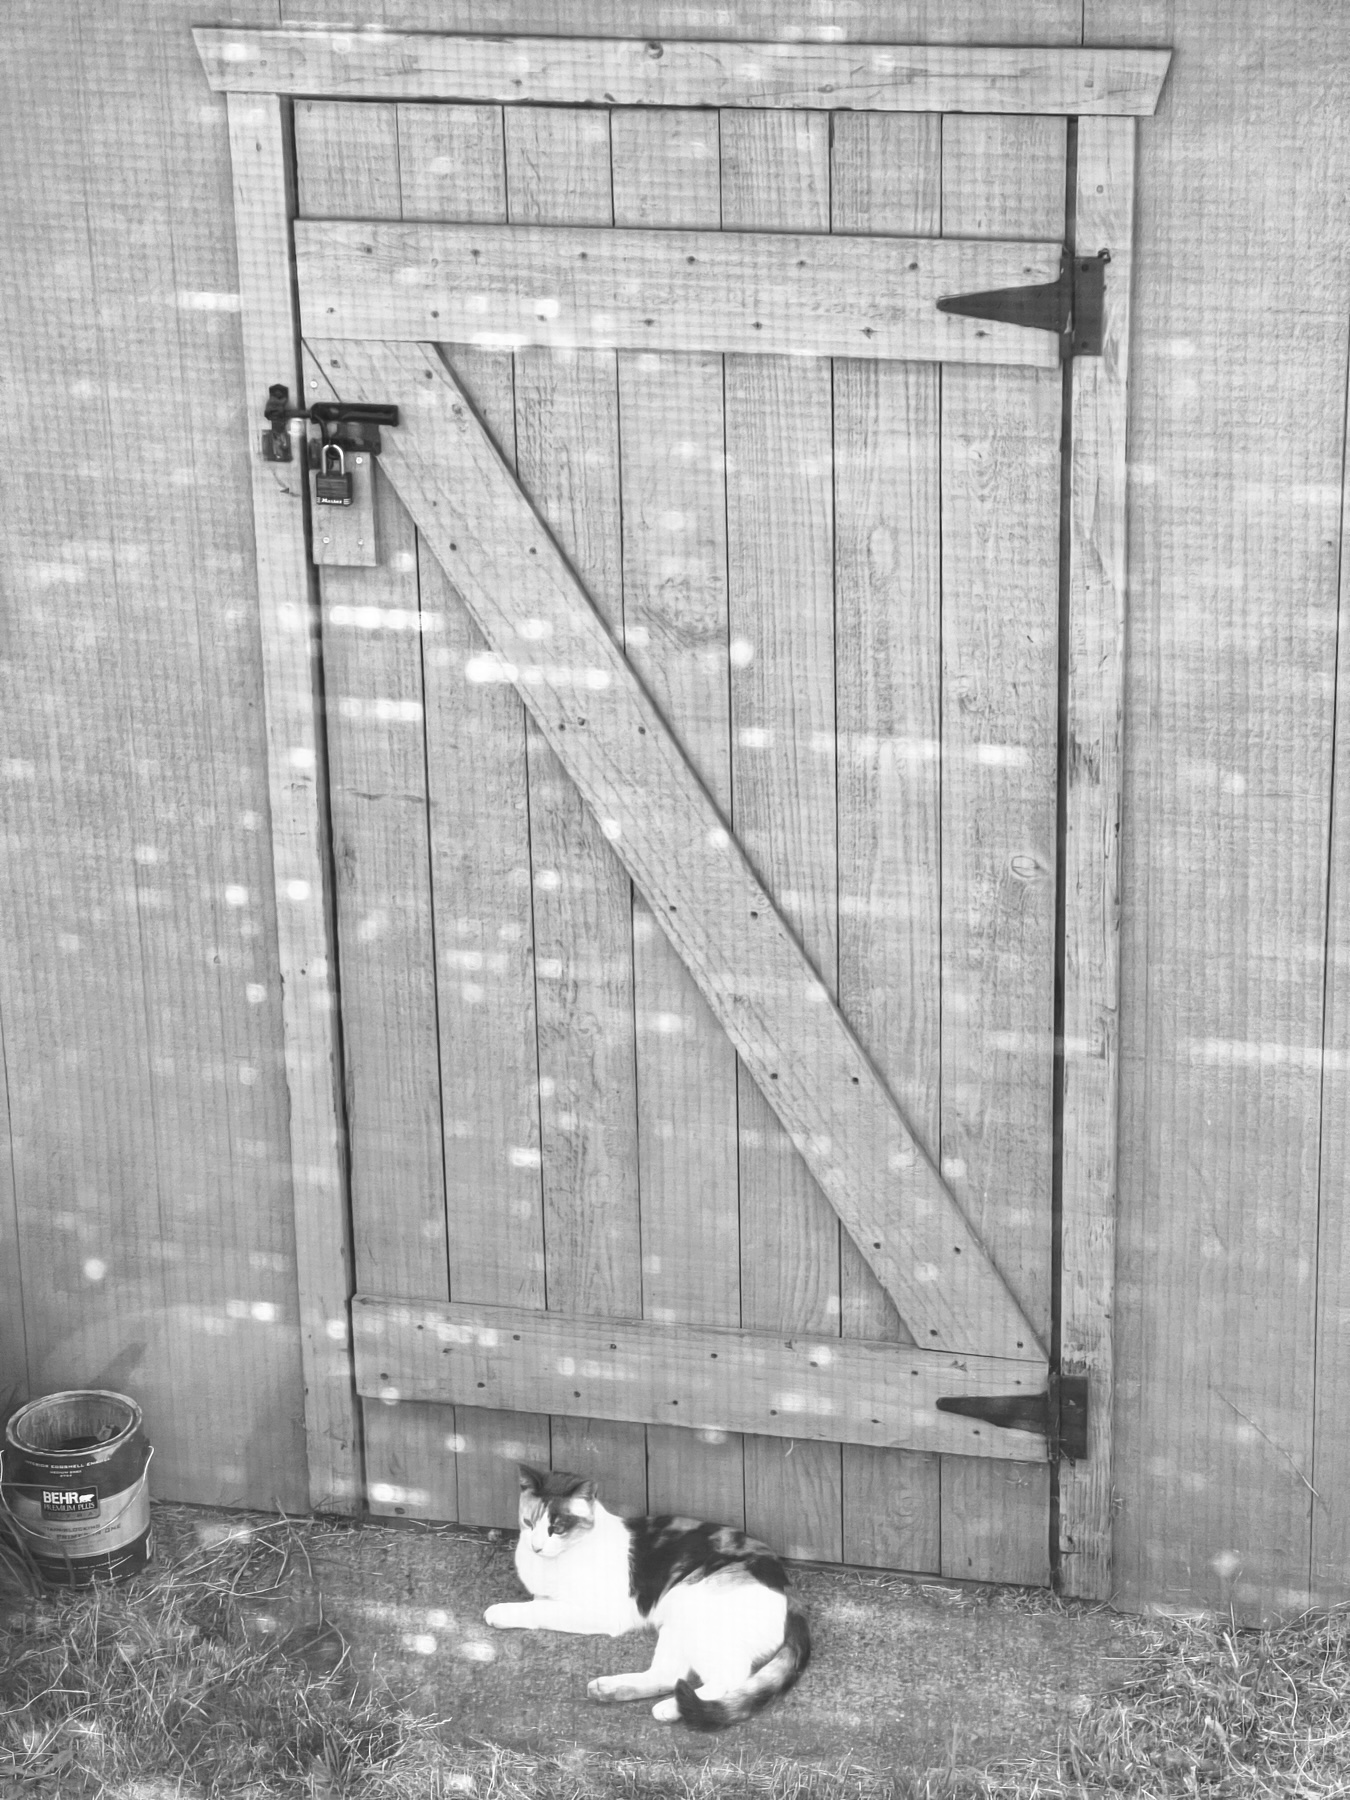 A cat sitting by a shed door.